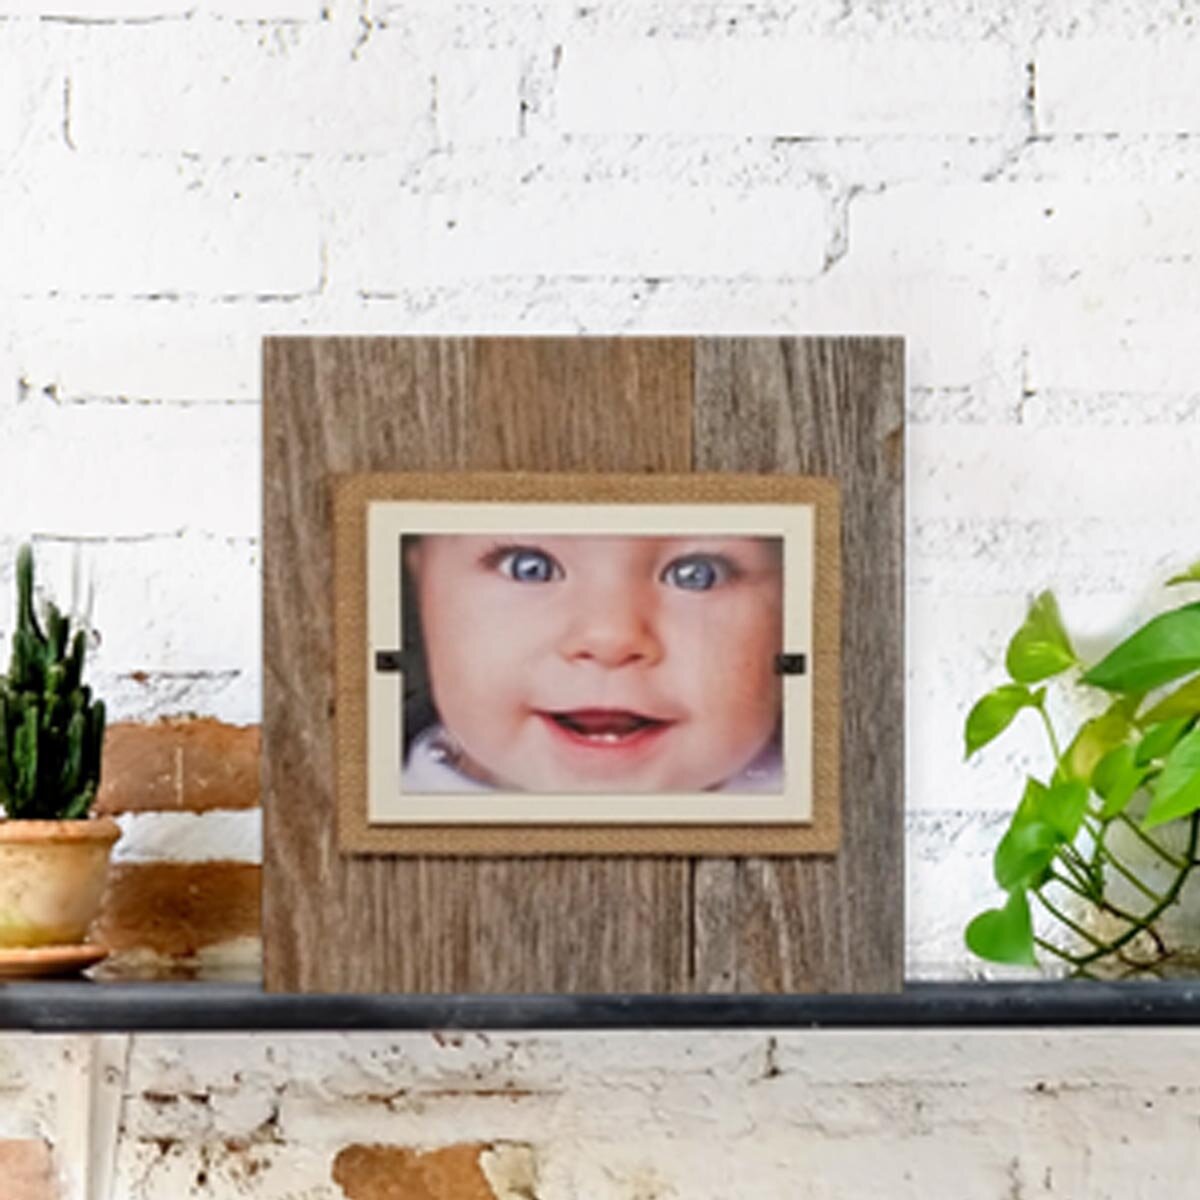 Modern Beach House Triple 4x6 Picture Wood Photo Frame with Burlap